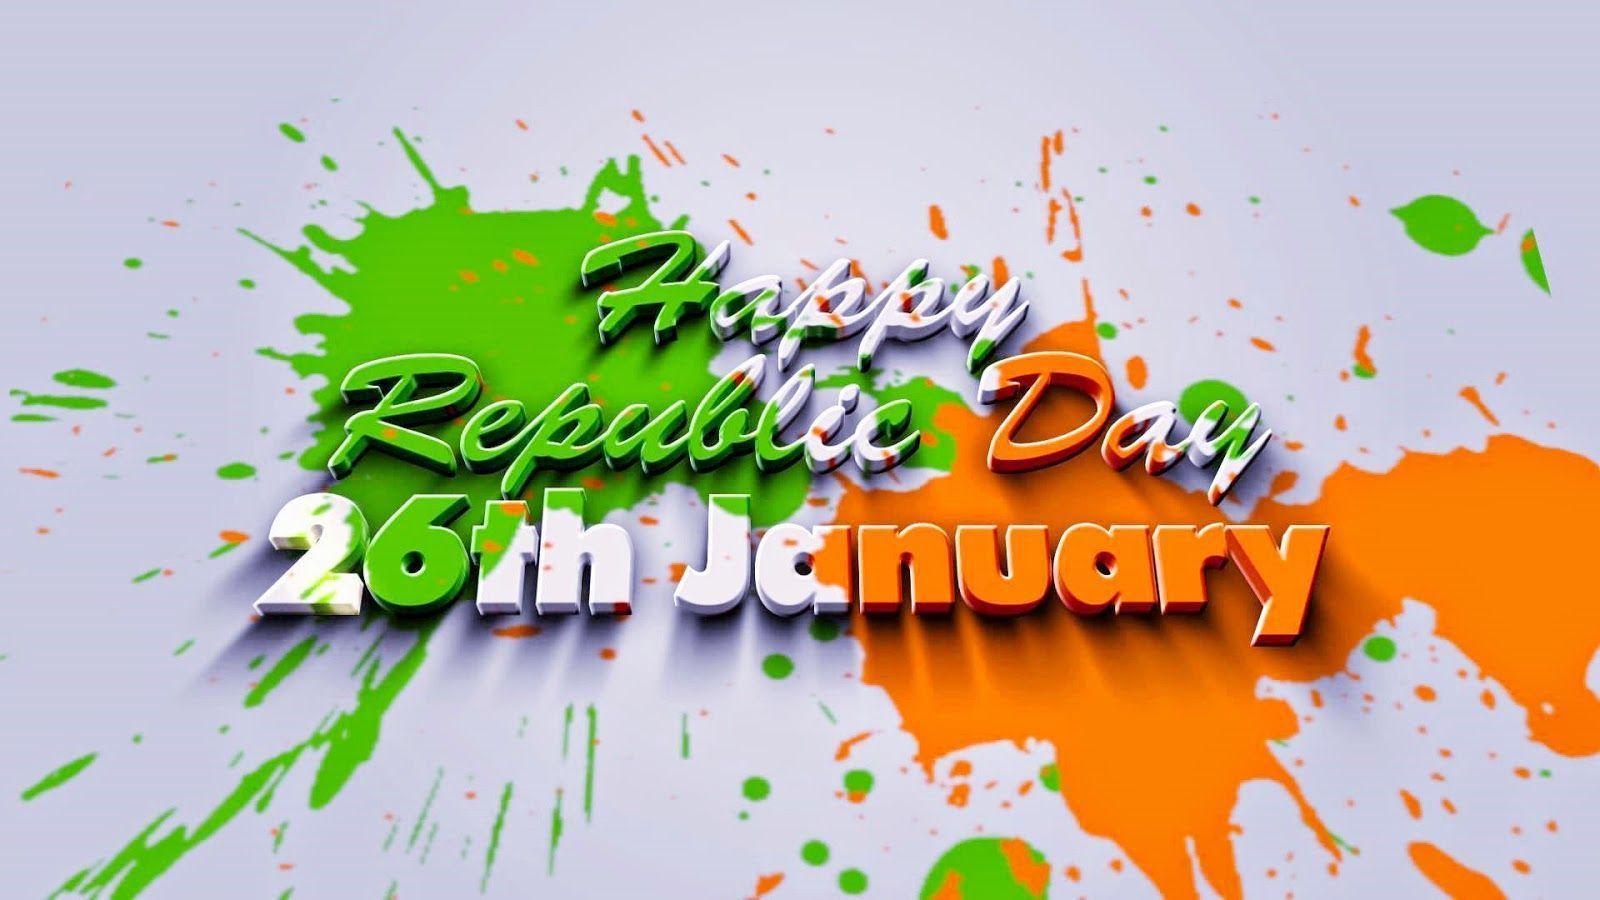 Live Indian Republic Day 2015 Speech in hindi for kids, childrens